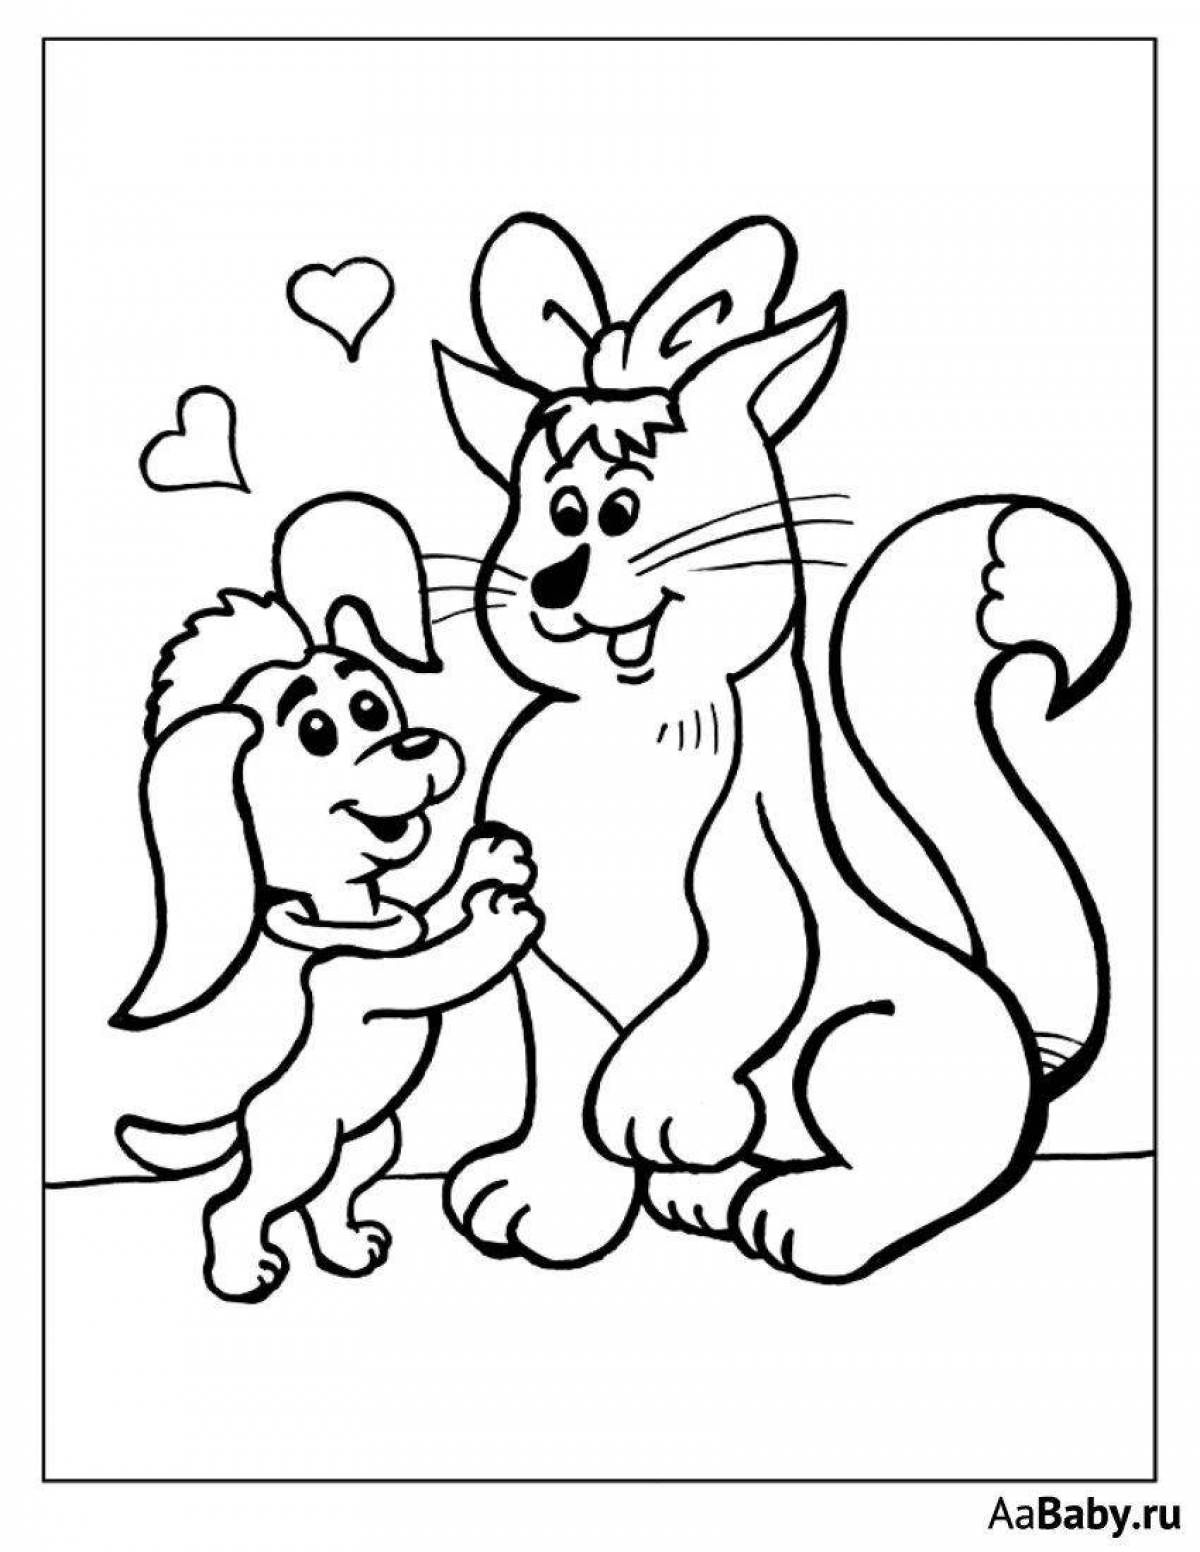 Fluffy cats and dogs coloring page